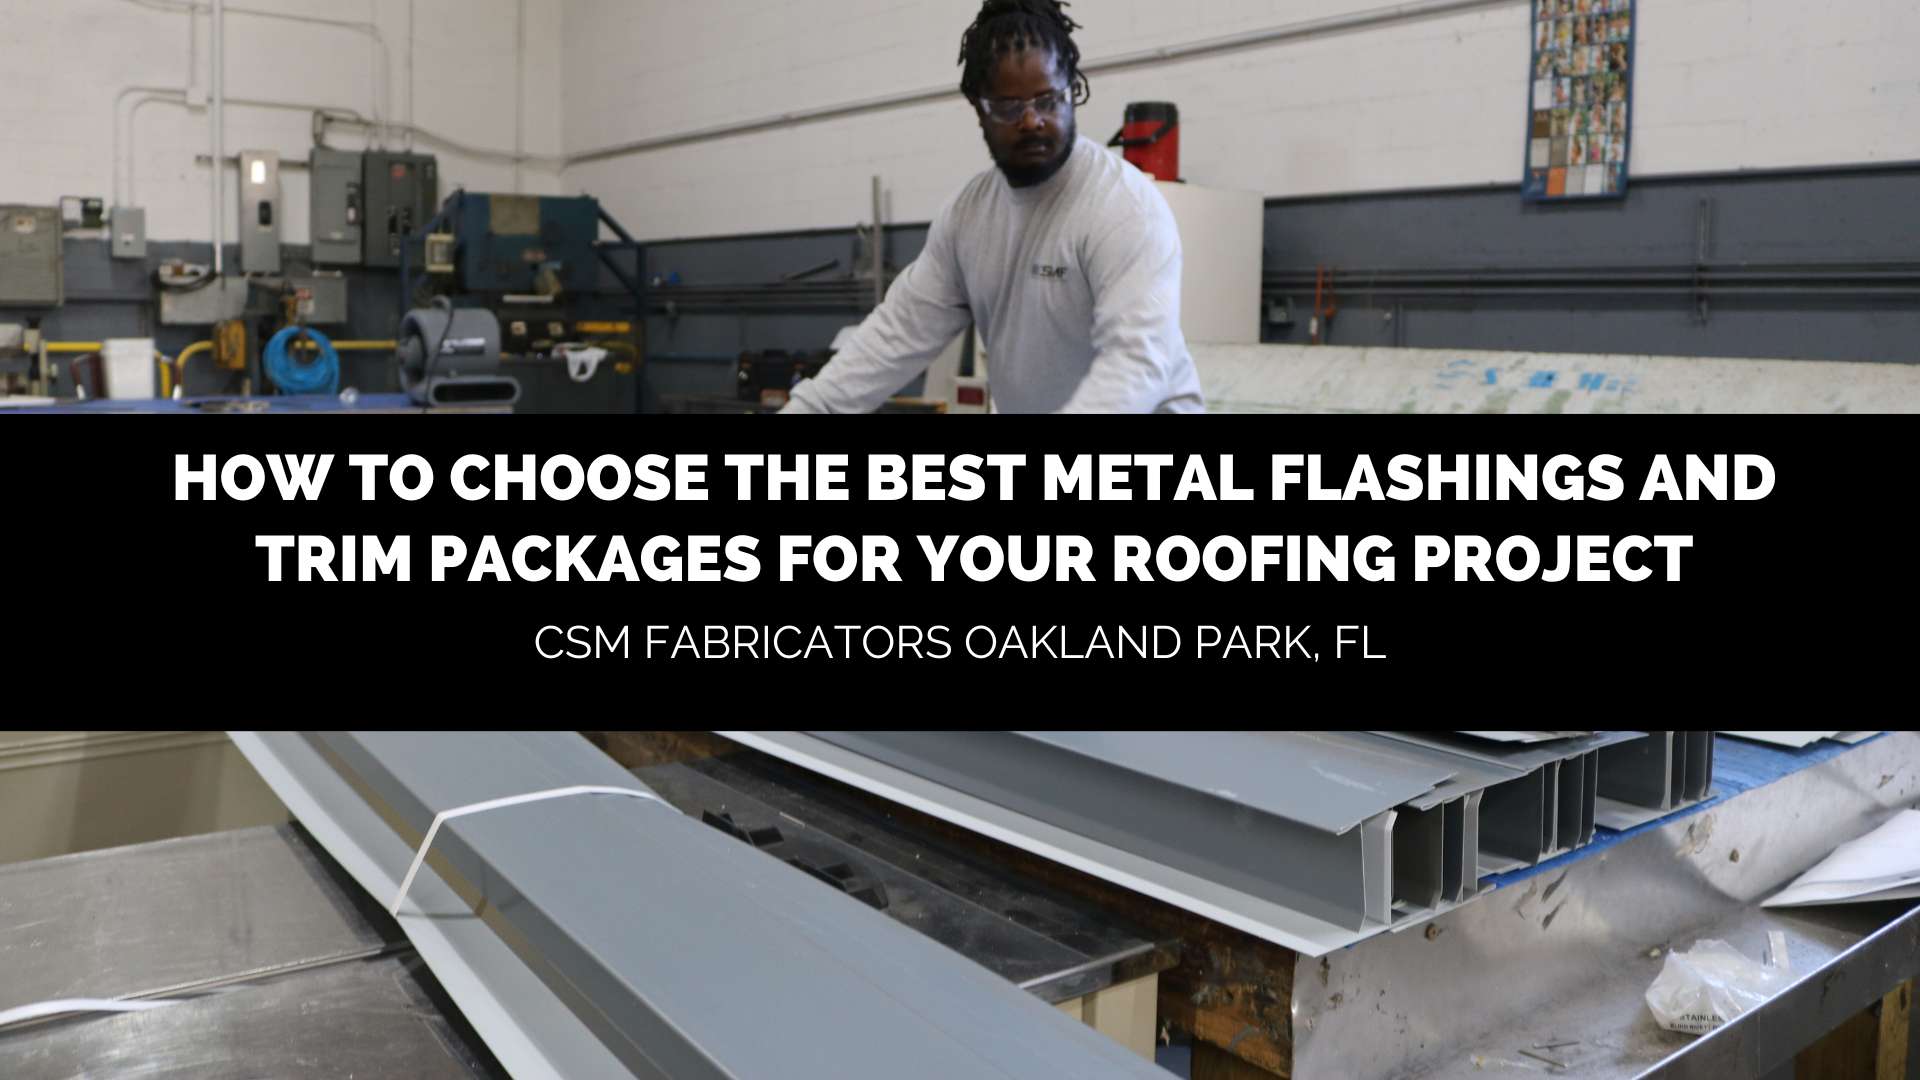 How to Choose the Best Metal Flashings and Trim Packages for Your Roofing Project